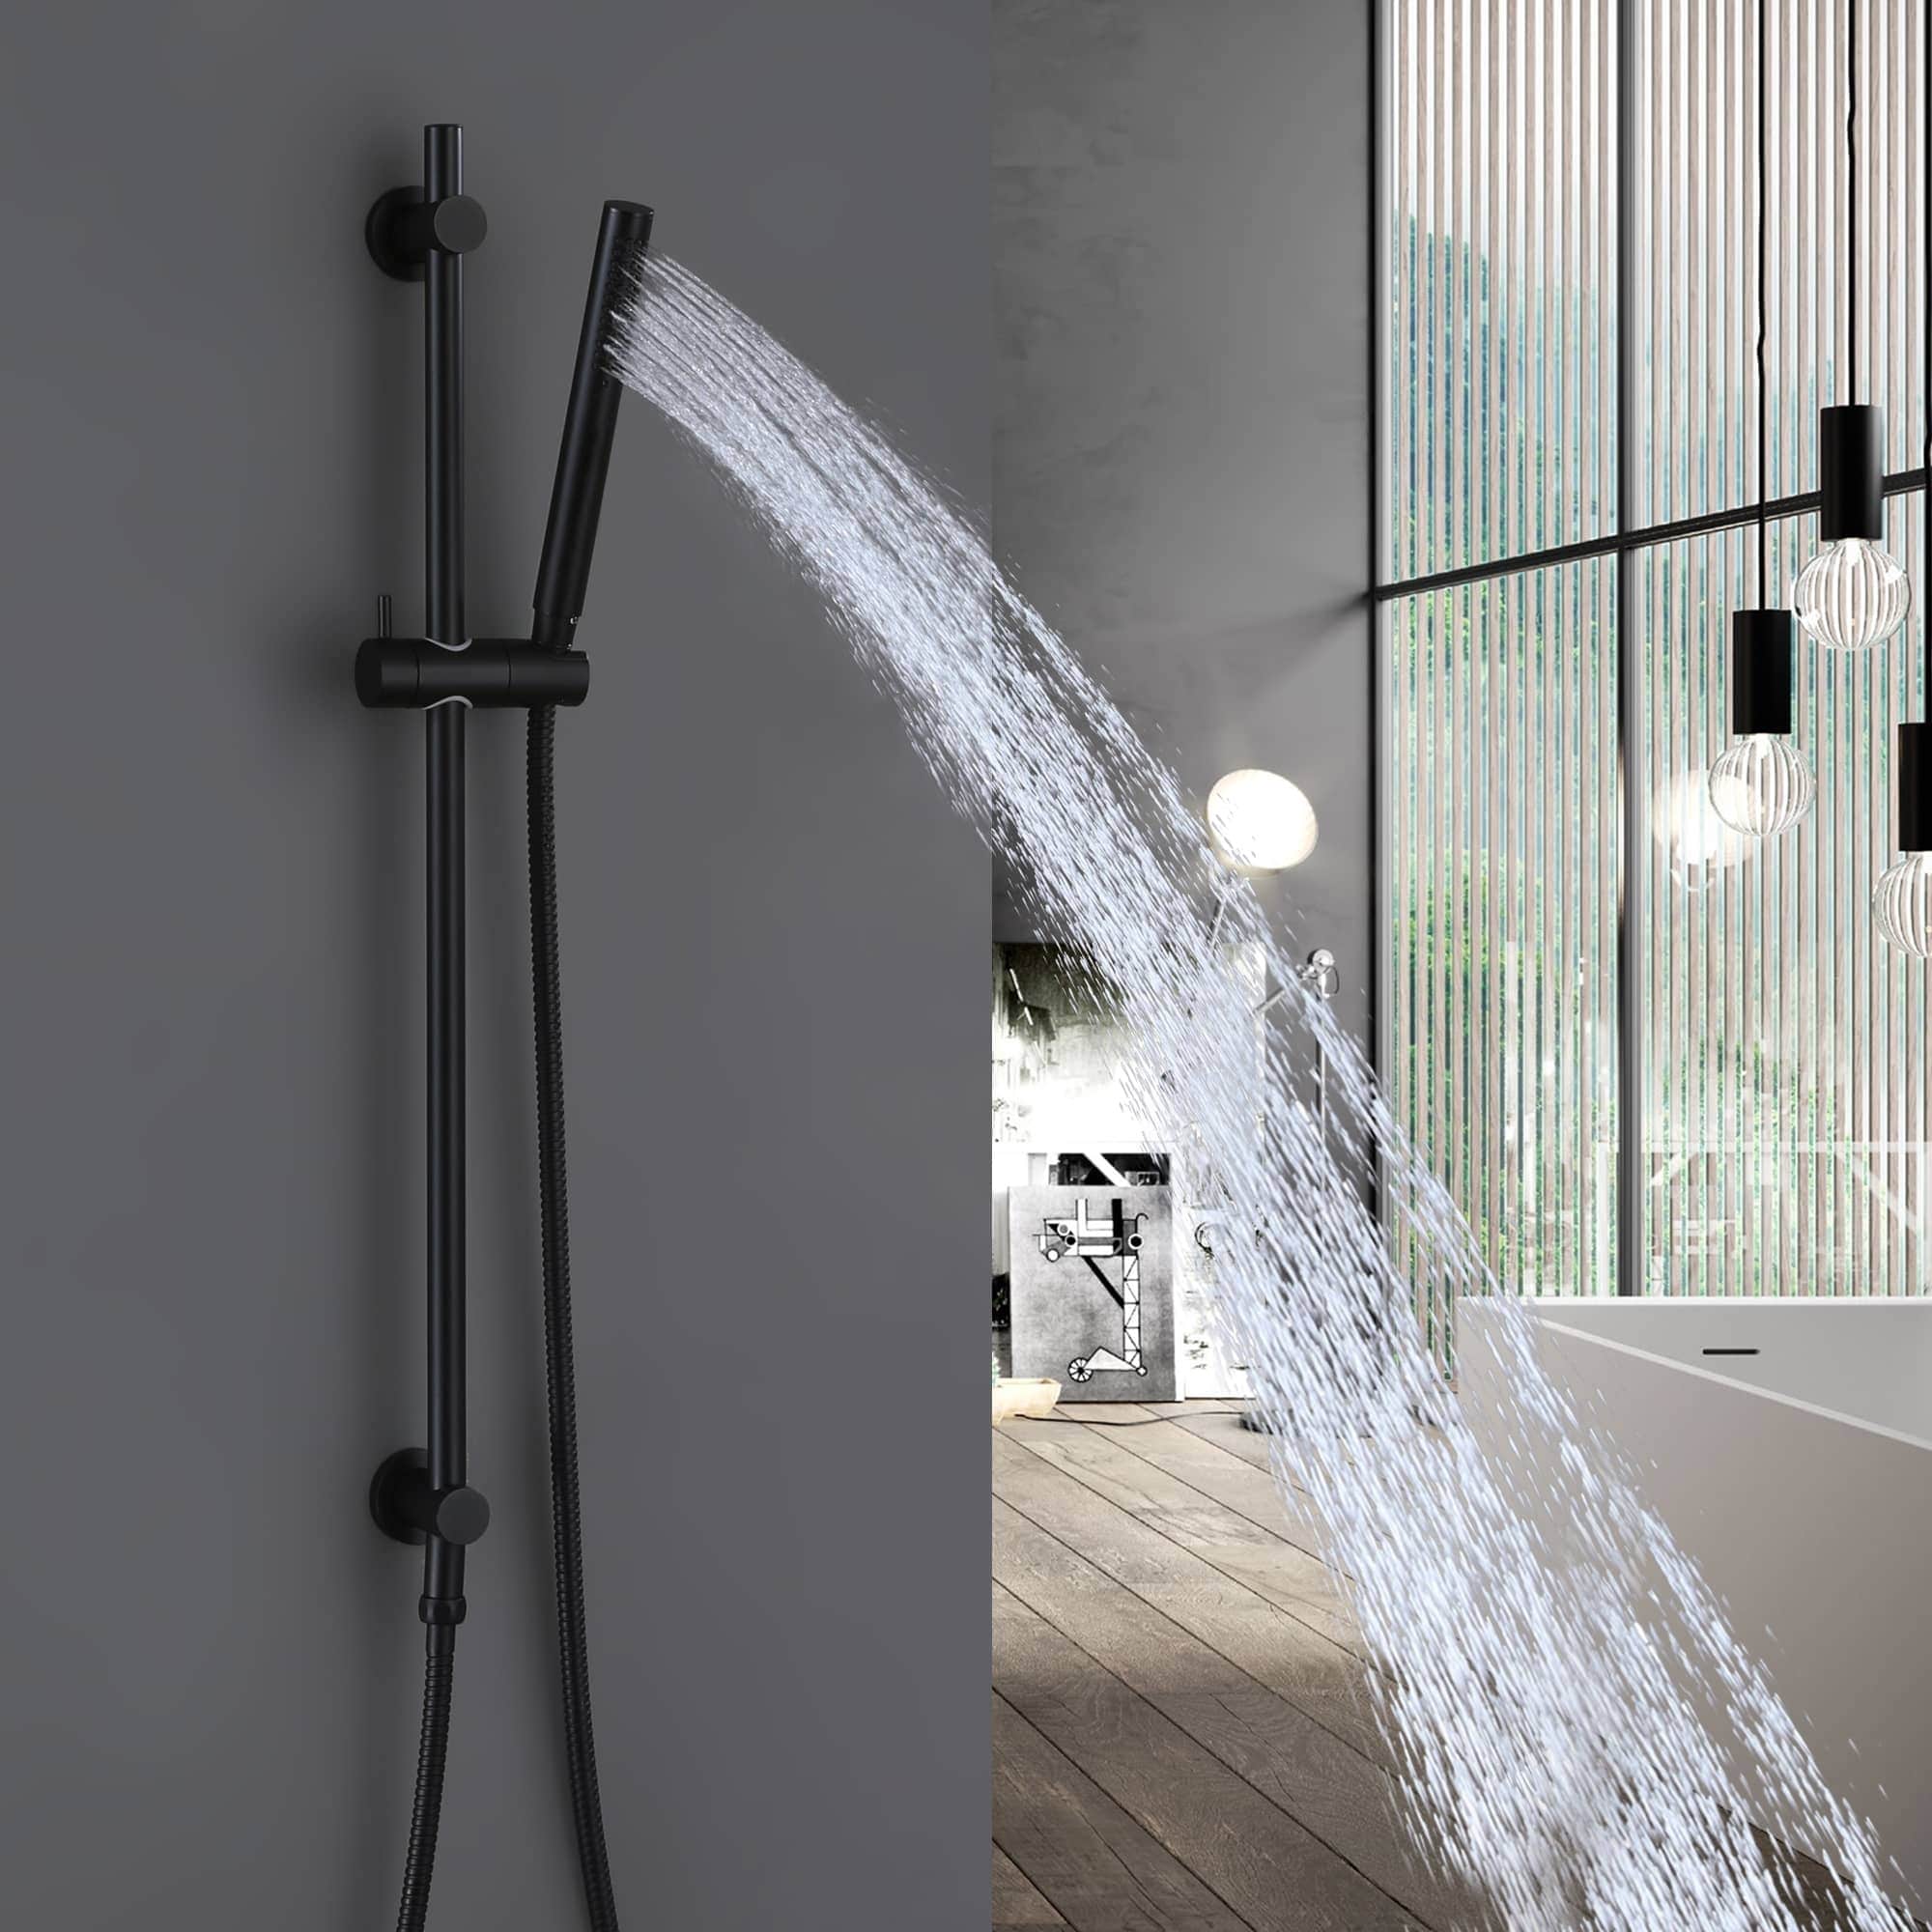 https://ak1.ostkcdn.com/images/products/is/images/direct/2de61d5757ab83739f8aa190aa3ff5d8e33dd0d4/Wall-Mount-Slide-Bar-with-Handheld-Shower-Head-Hand-Shower-Hose-Holder-Touch-Clean-Sprayer-Matte-Black.jpg